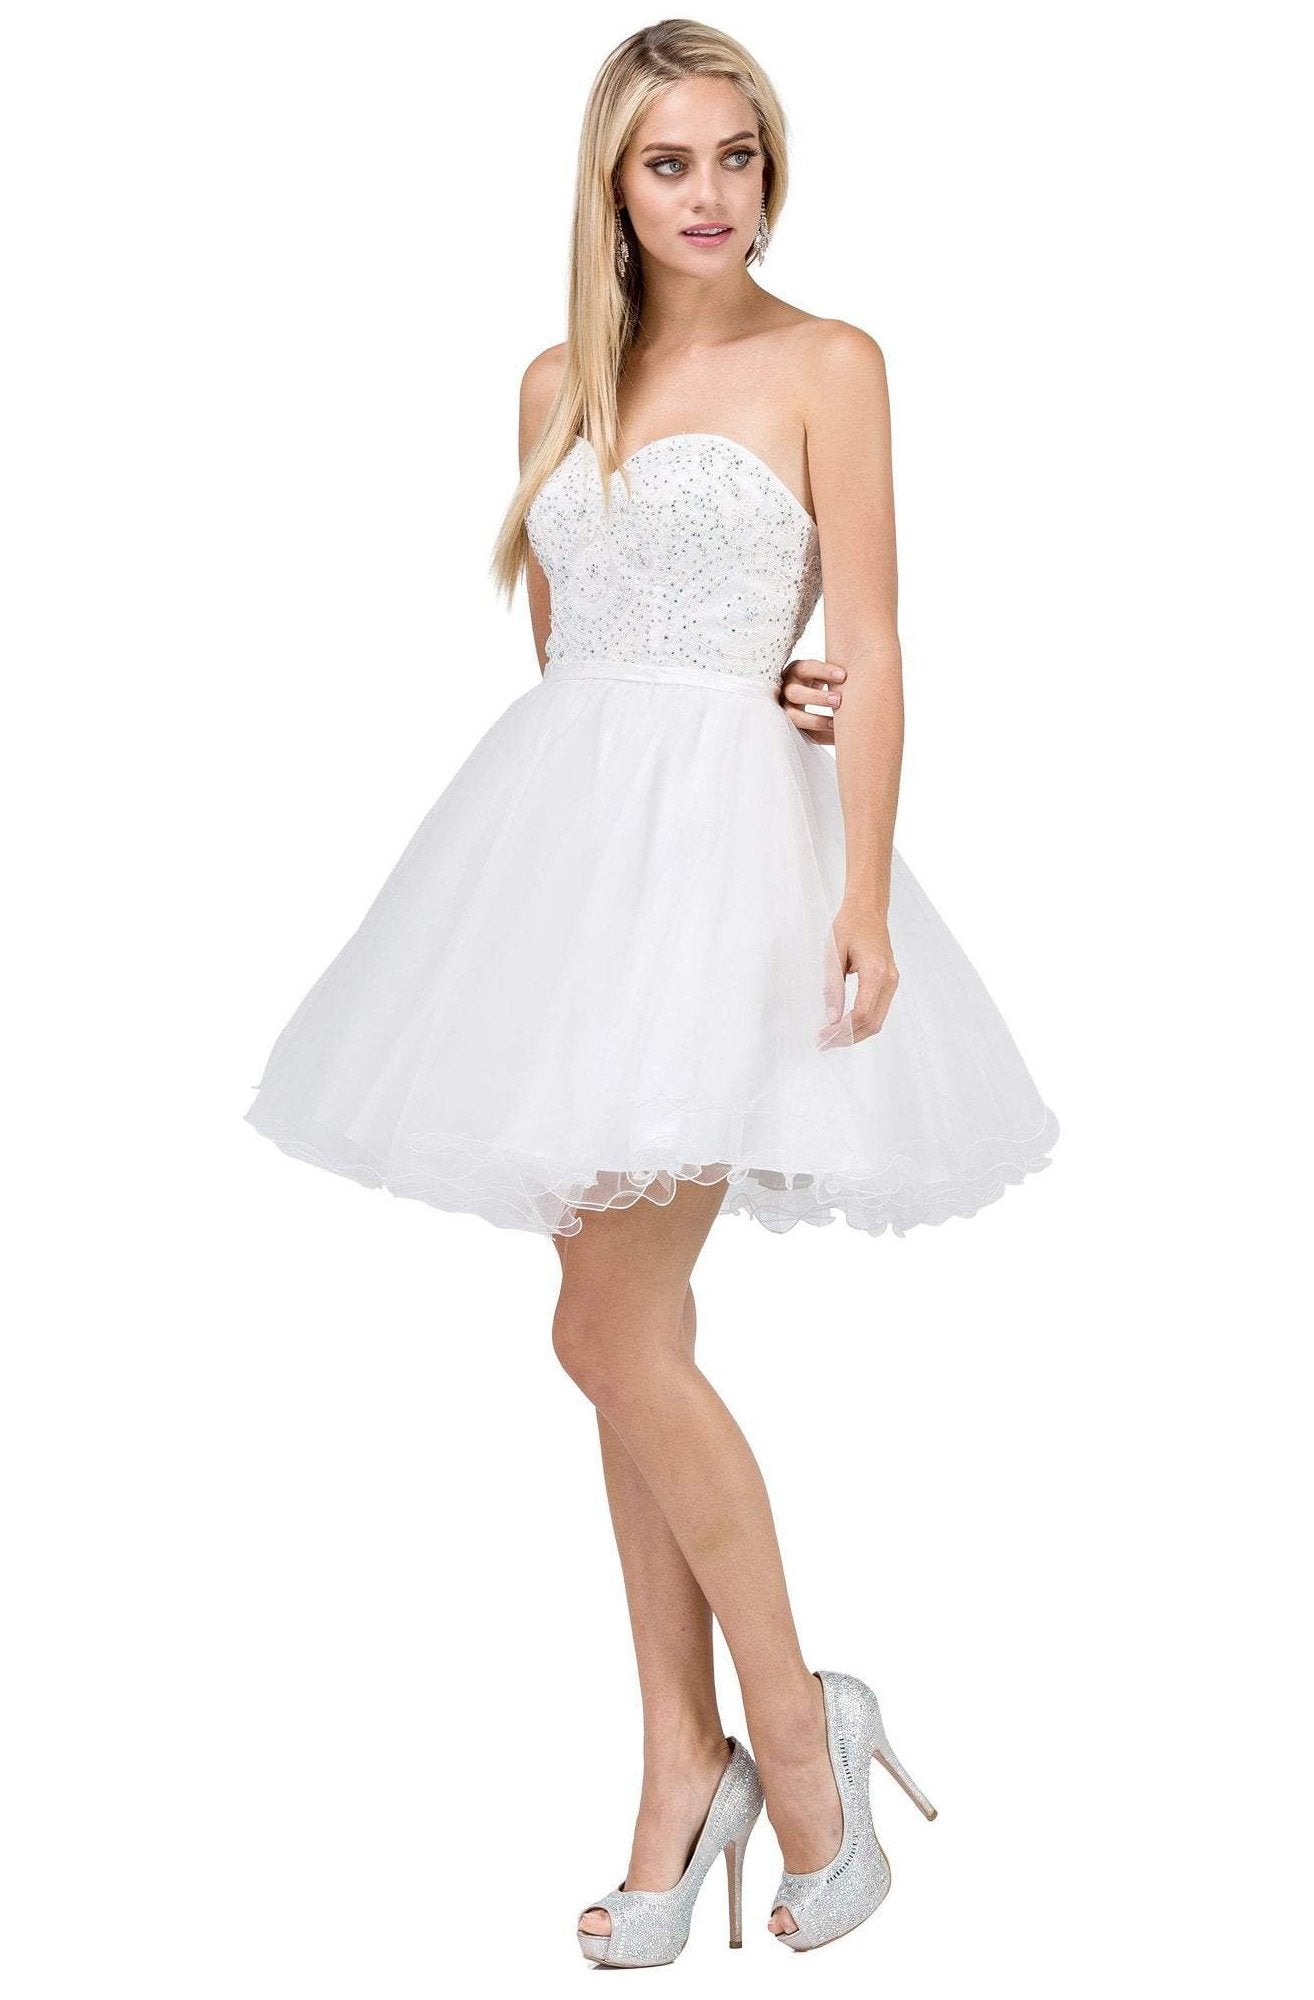 Dancing Queen - 3014 Strapless Embellished Sweetheart Homecoming Dress In White